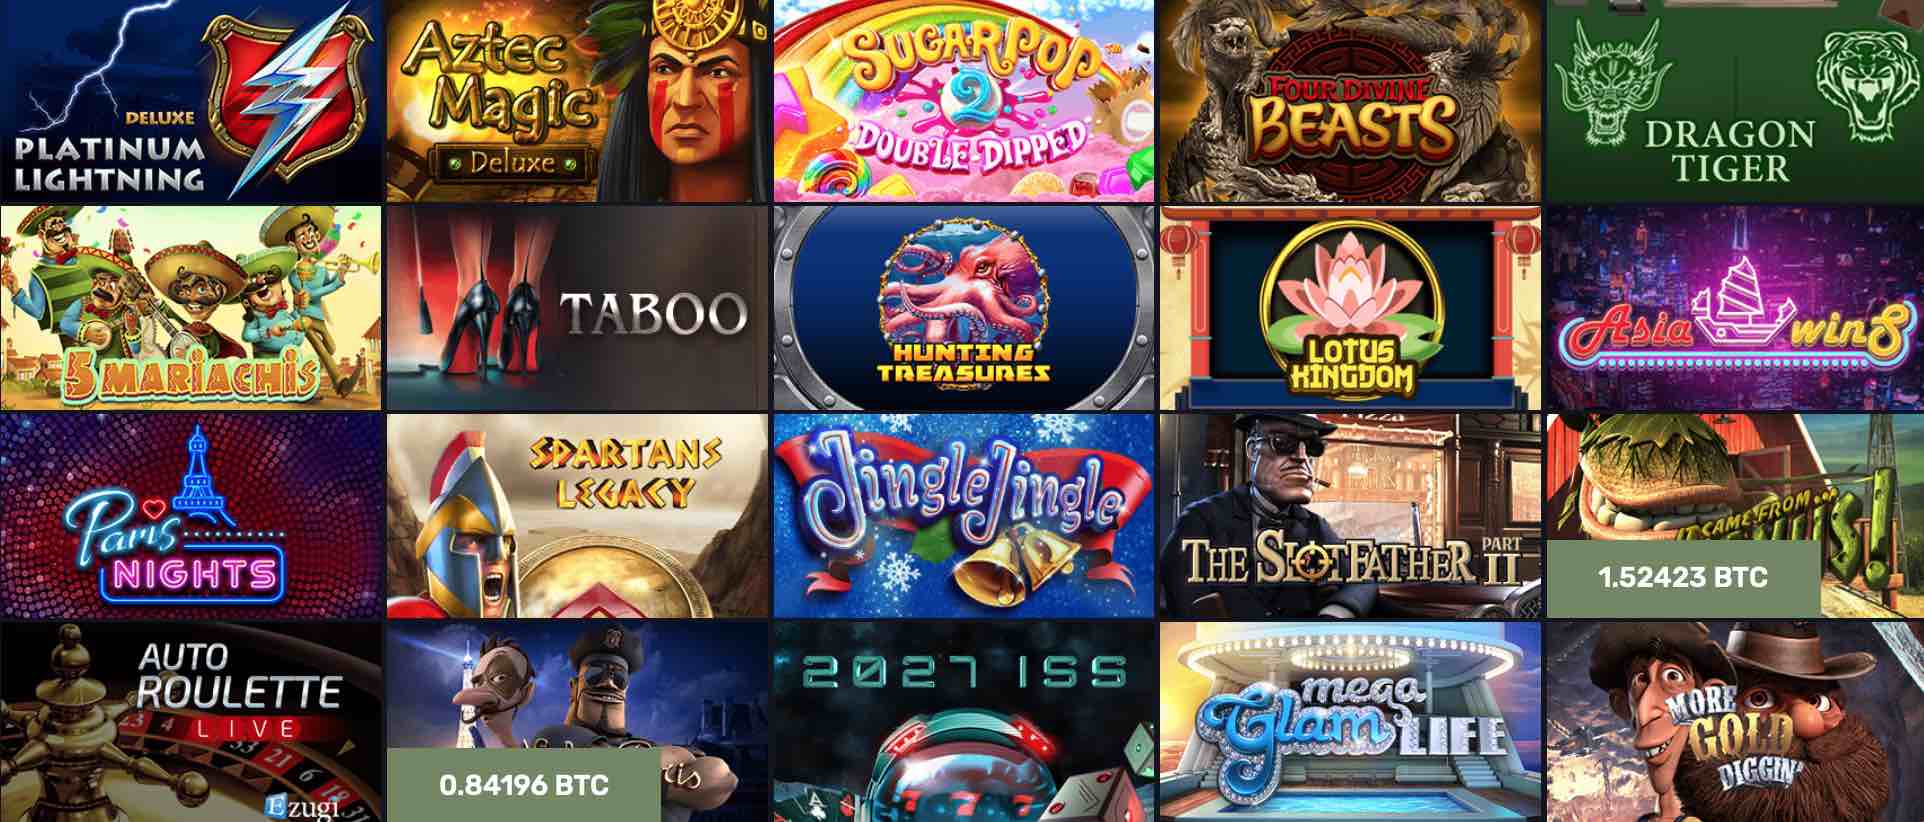 Casino games ranked by odds